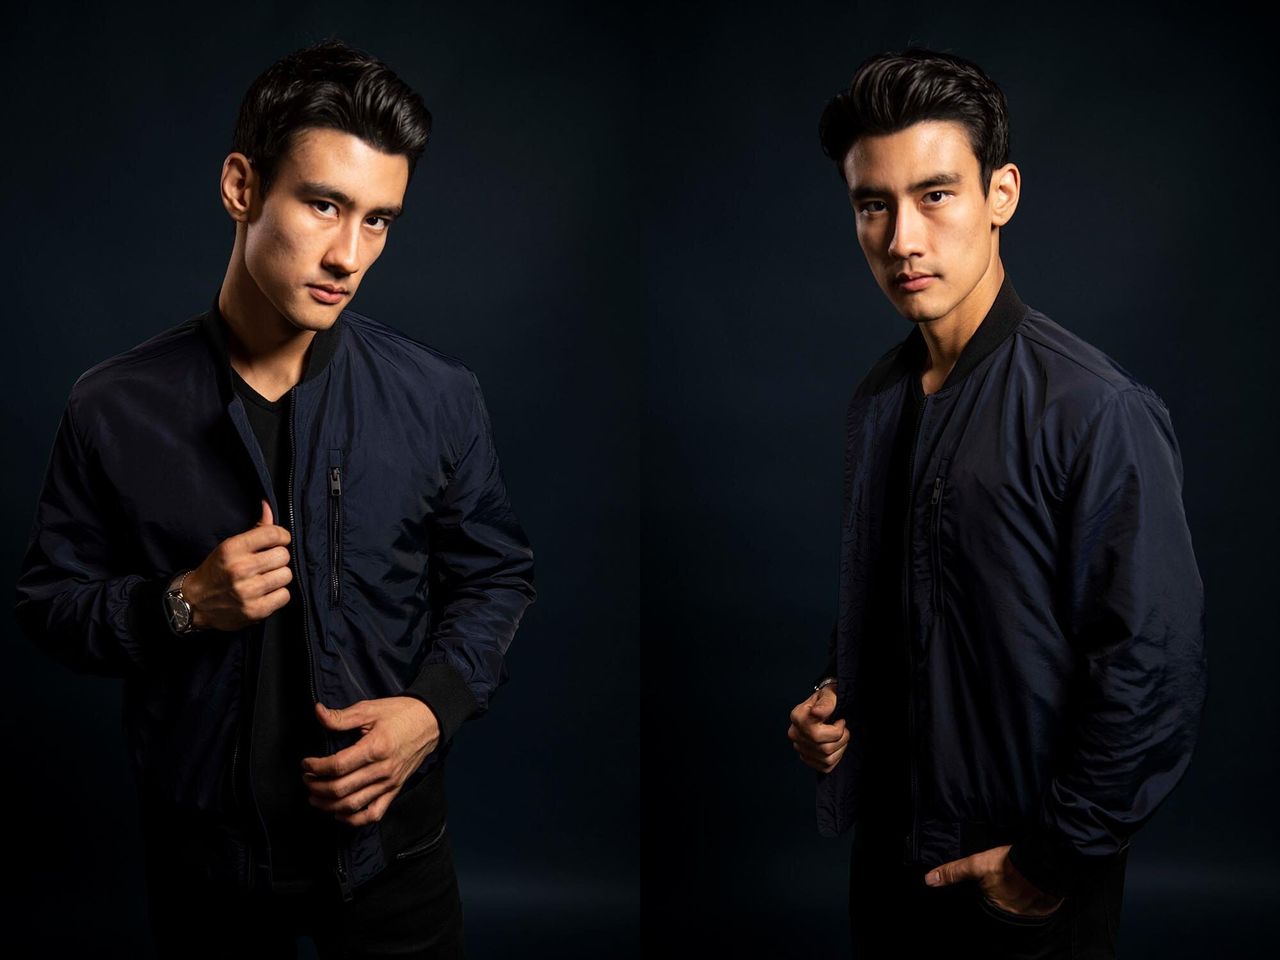 Landi's dream gig? A role in “Shang-Chi,” which will be Marvel’s first superhero film to feature an Asian protagonist. "That would be dope,” he said. 